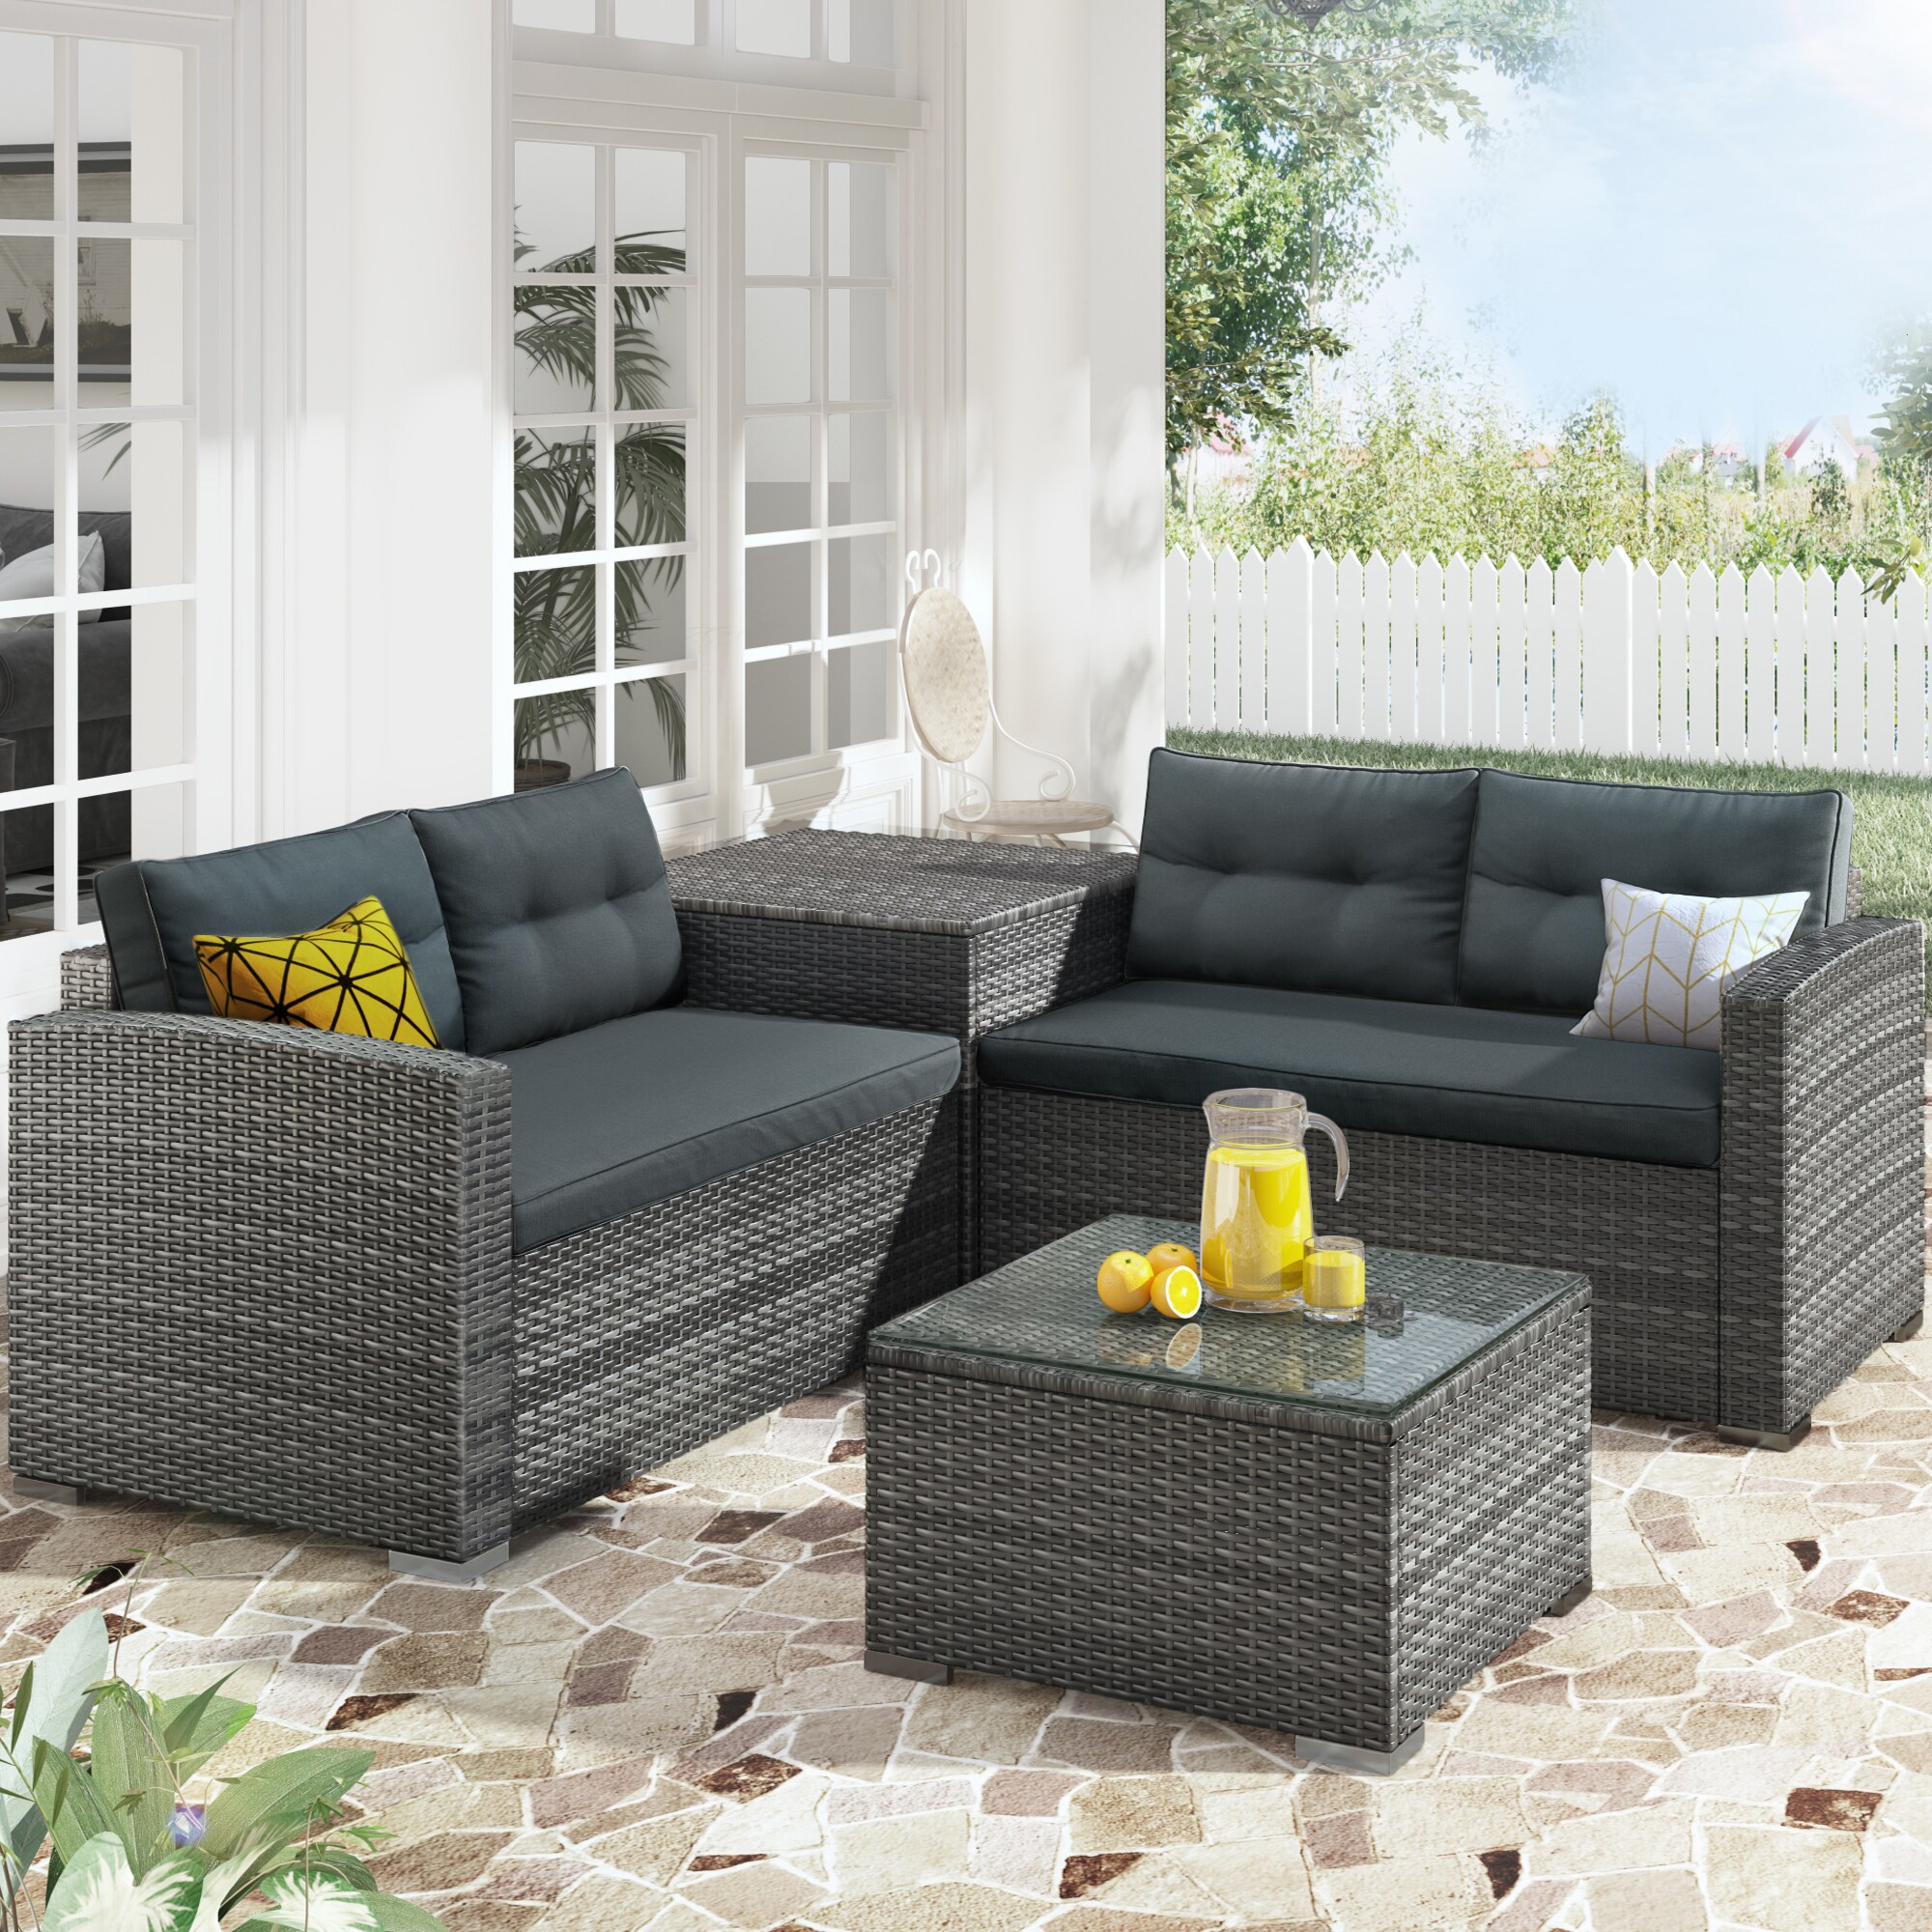 and Glass Coffee Table Best Choice Products 4-Piece Patio Metal Conversation Furniture Set w/Loveseat Gray 2 Chairs 